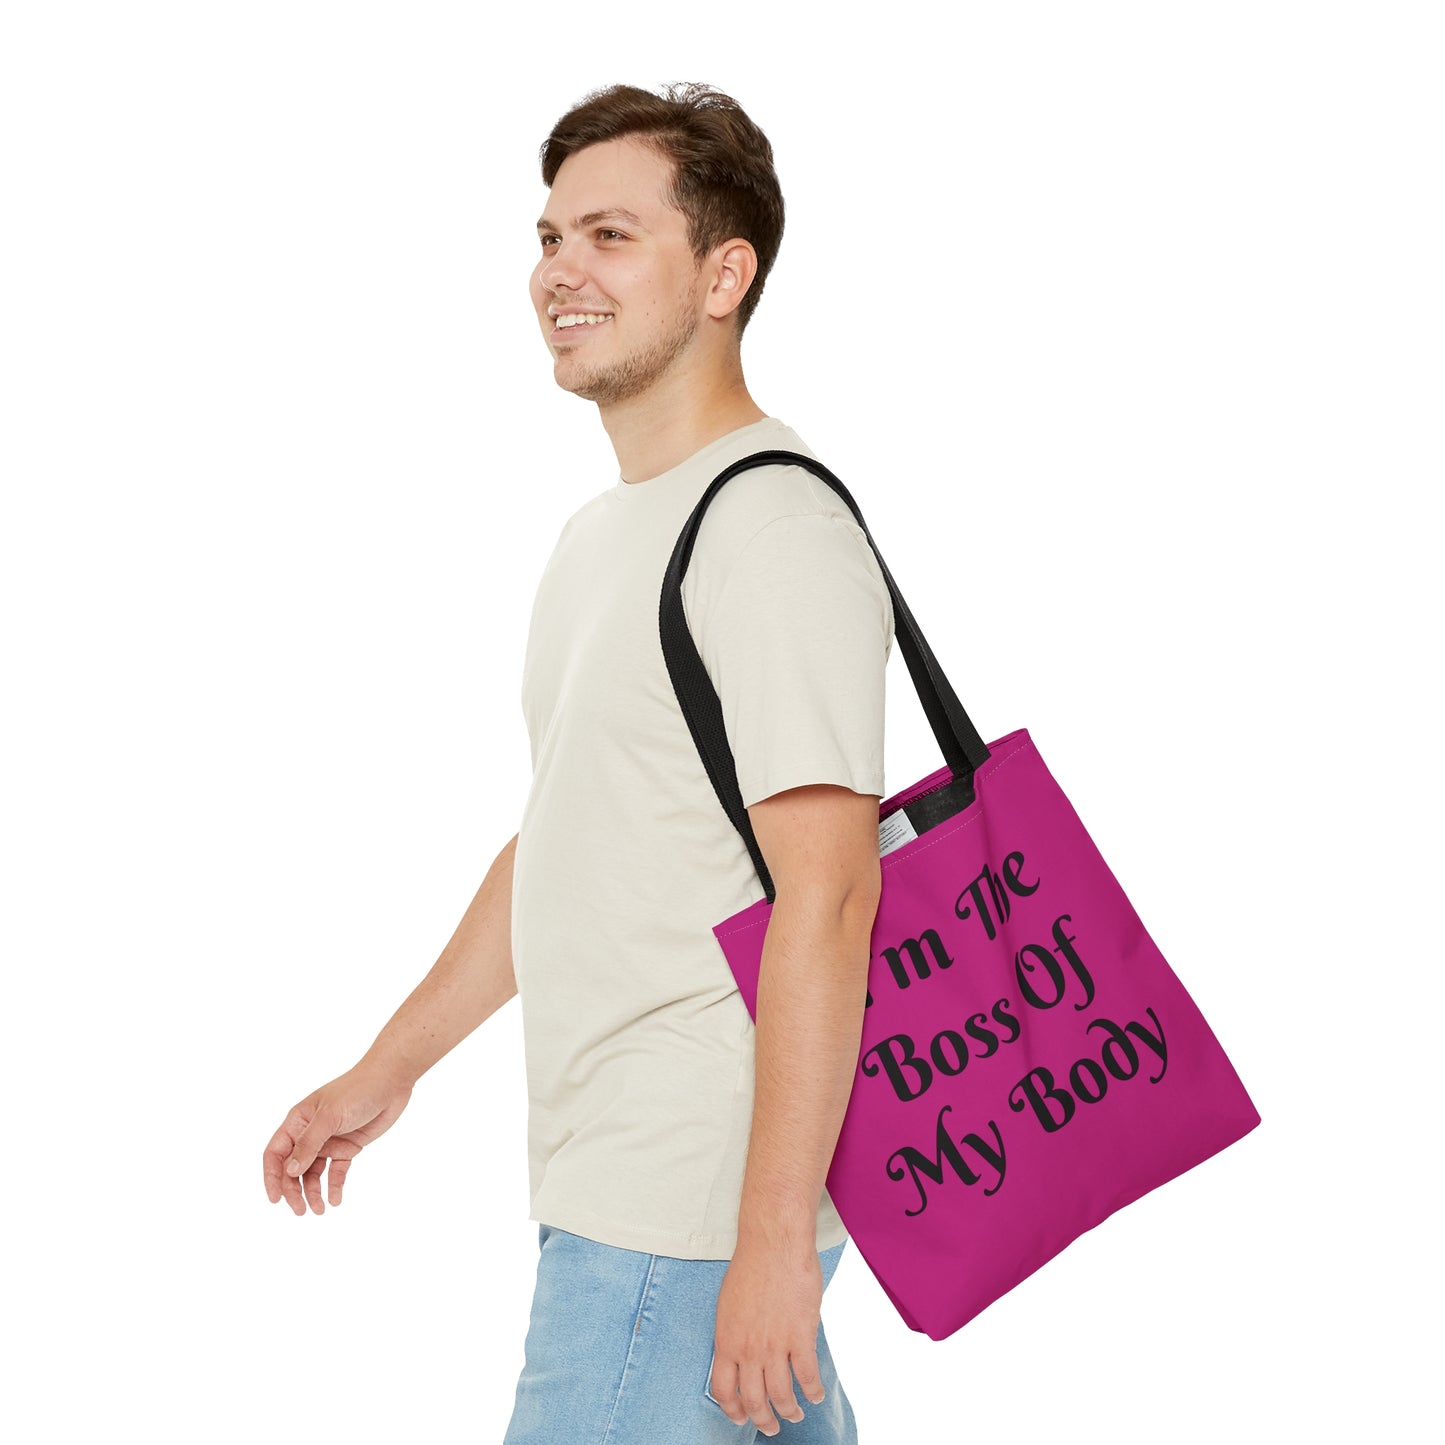 Hot Pink with Black Cotton Handles ITBOM Body Tote Bag